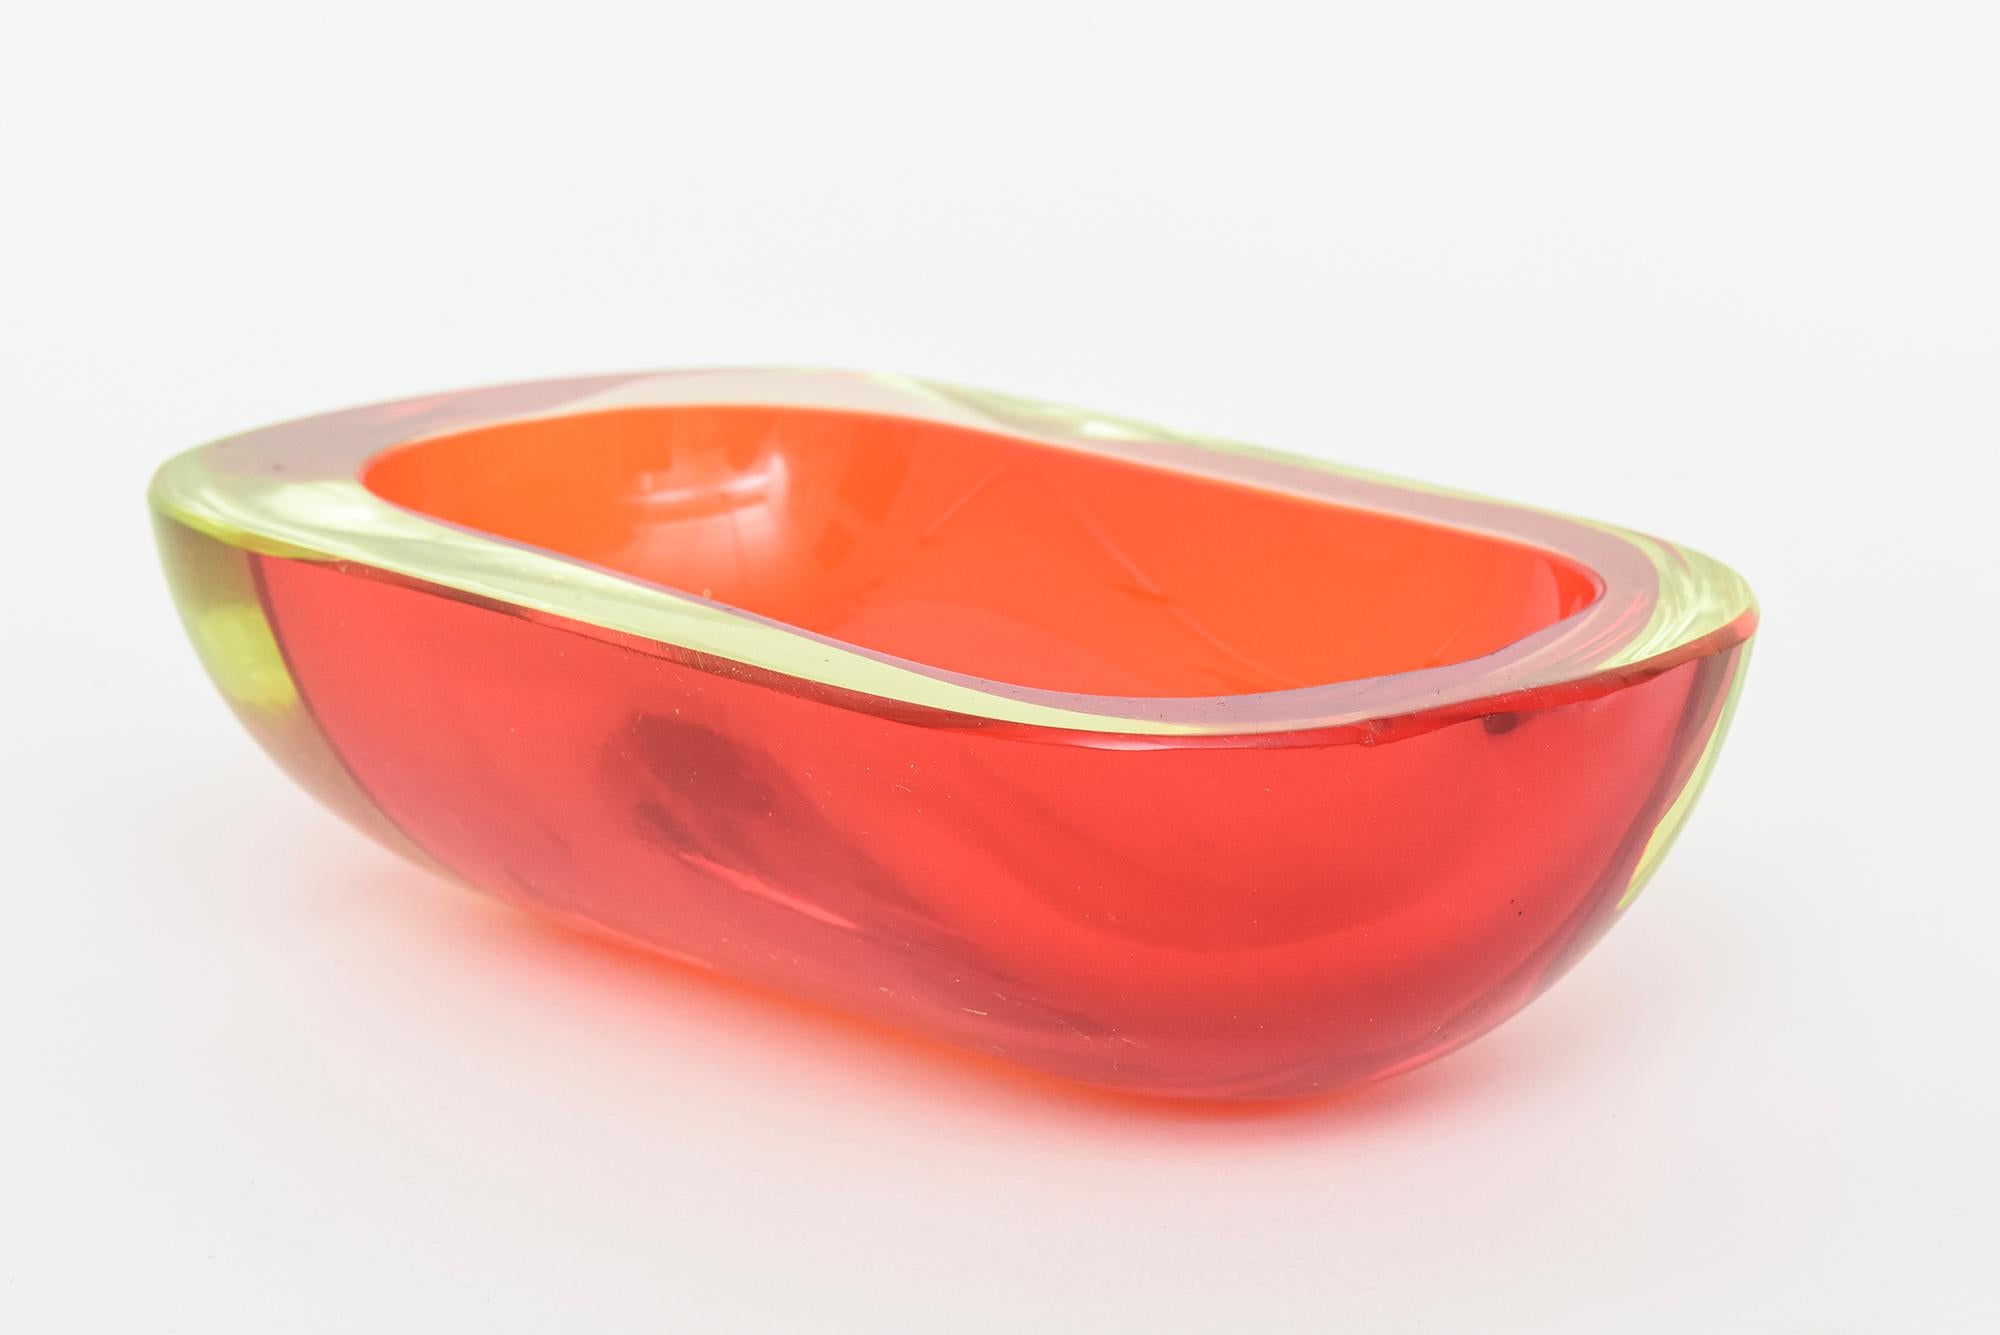 Blown Glass Vintage Flavio Poli Murano Red and Yellow Uranium Sommerso Oblong Glass Bowl For Sale